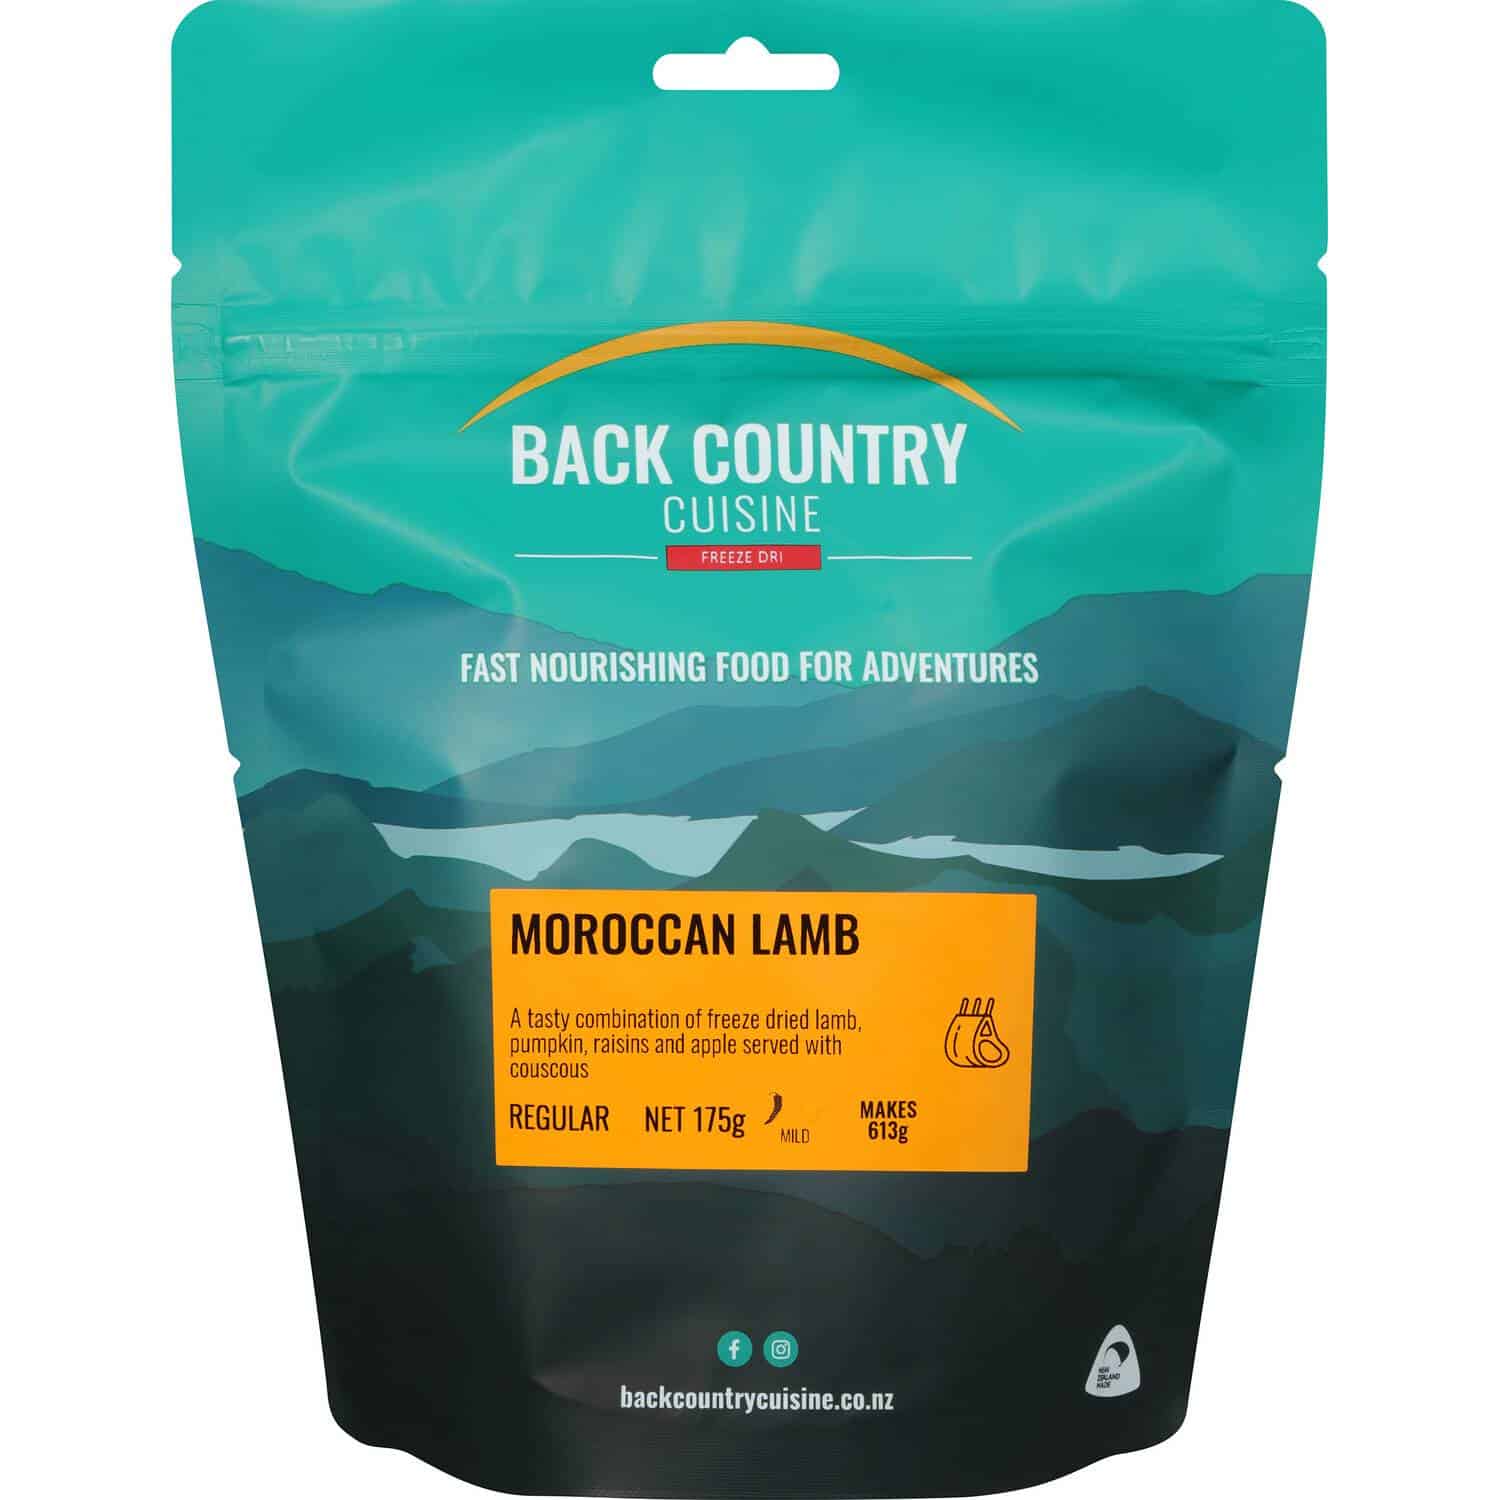 Back Country Cuisine Moroccan Lamb Regular - Tramping Food and Accessories sold by Venture Outdoors NZ